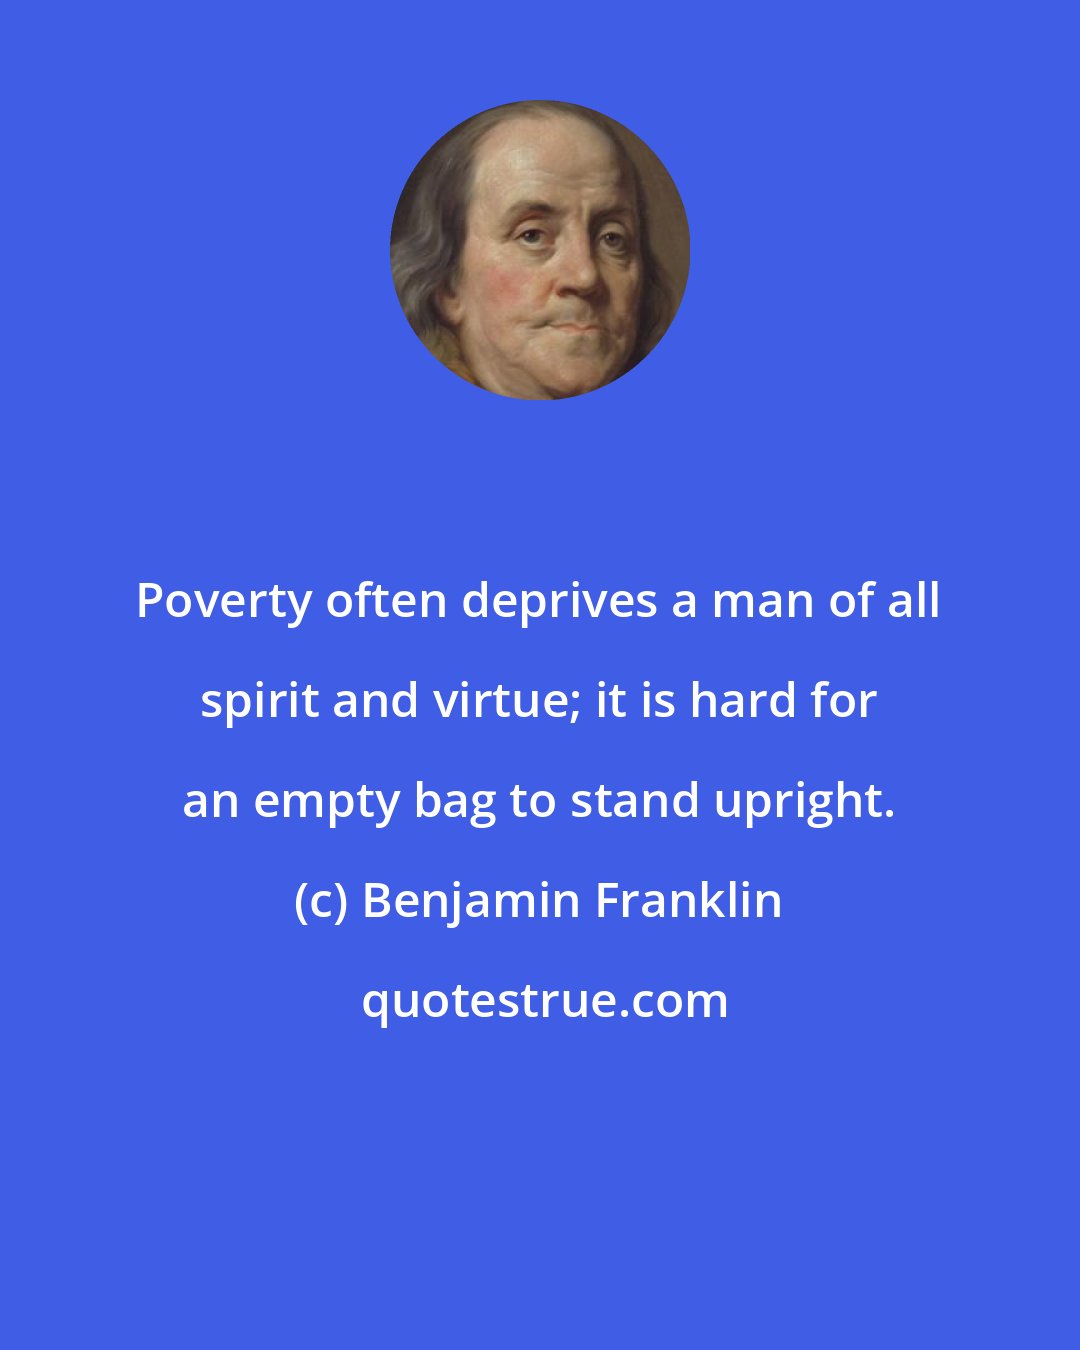 Benjamin Franklin: Poverty often deprives a man of all spirit and virtue; it is hard for an empty bag to stand upright.